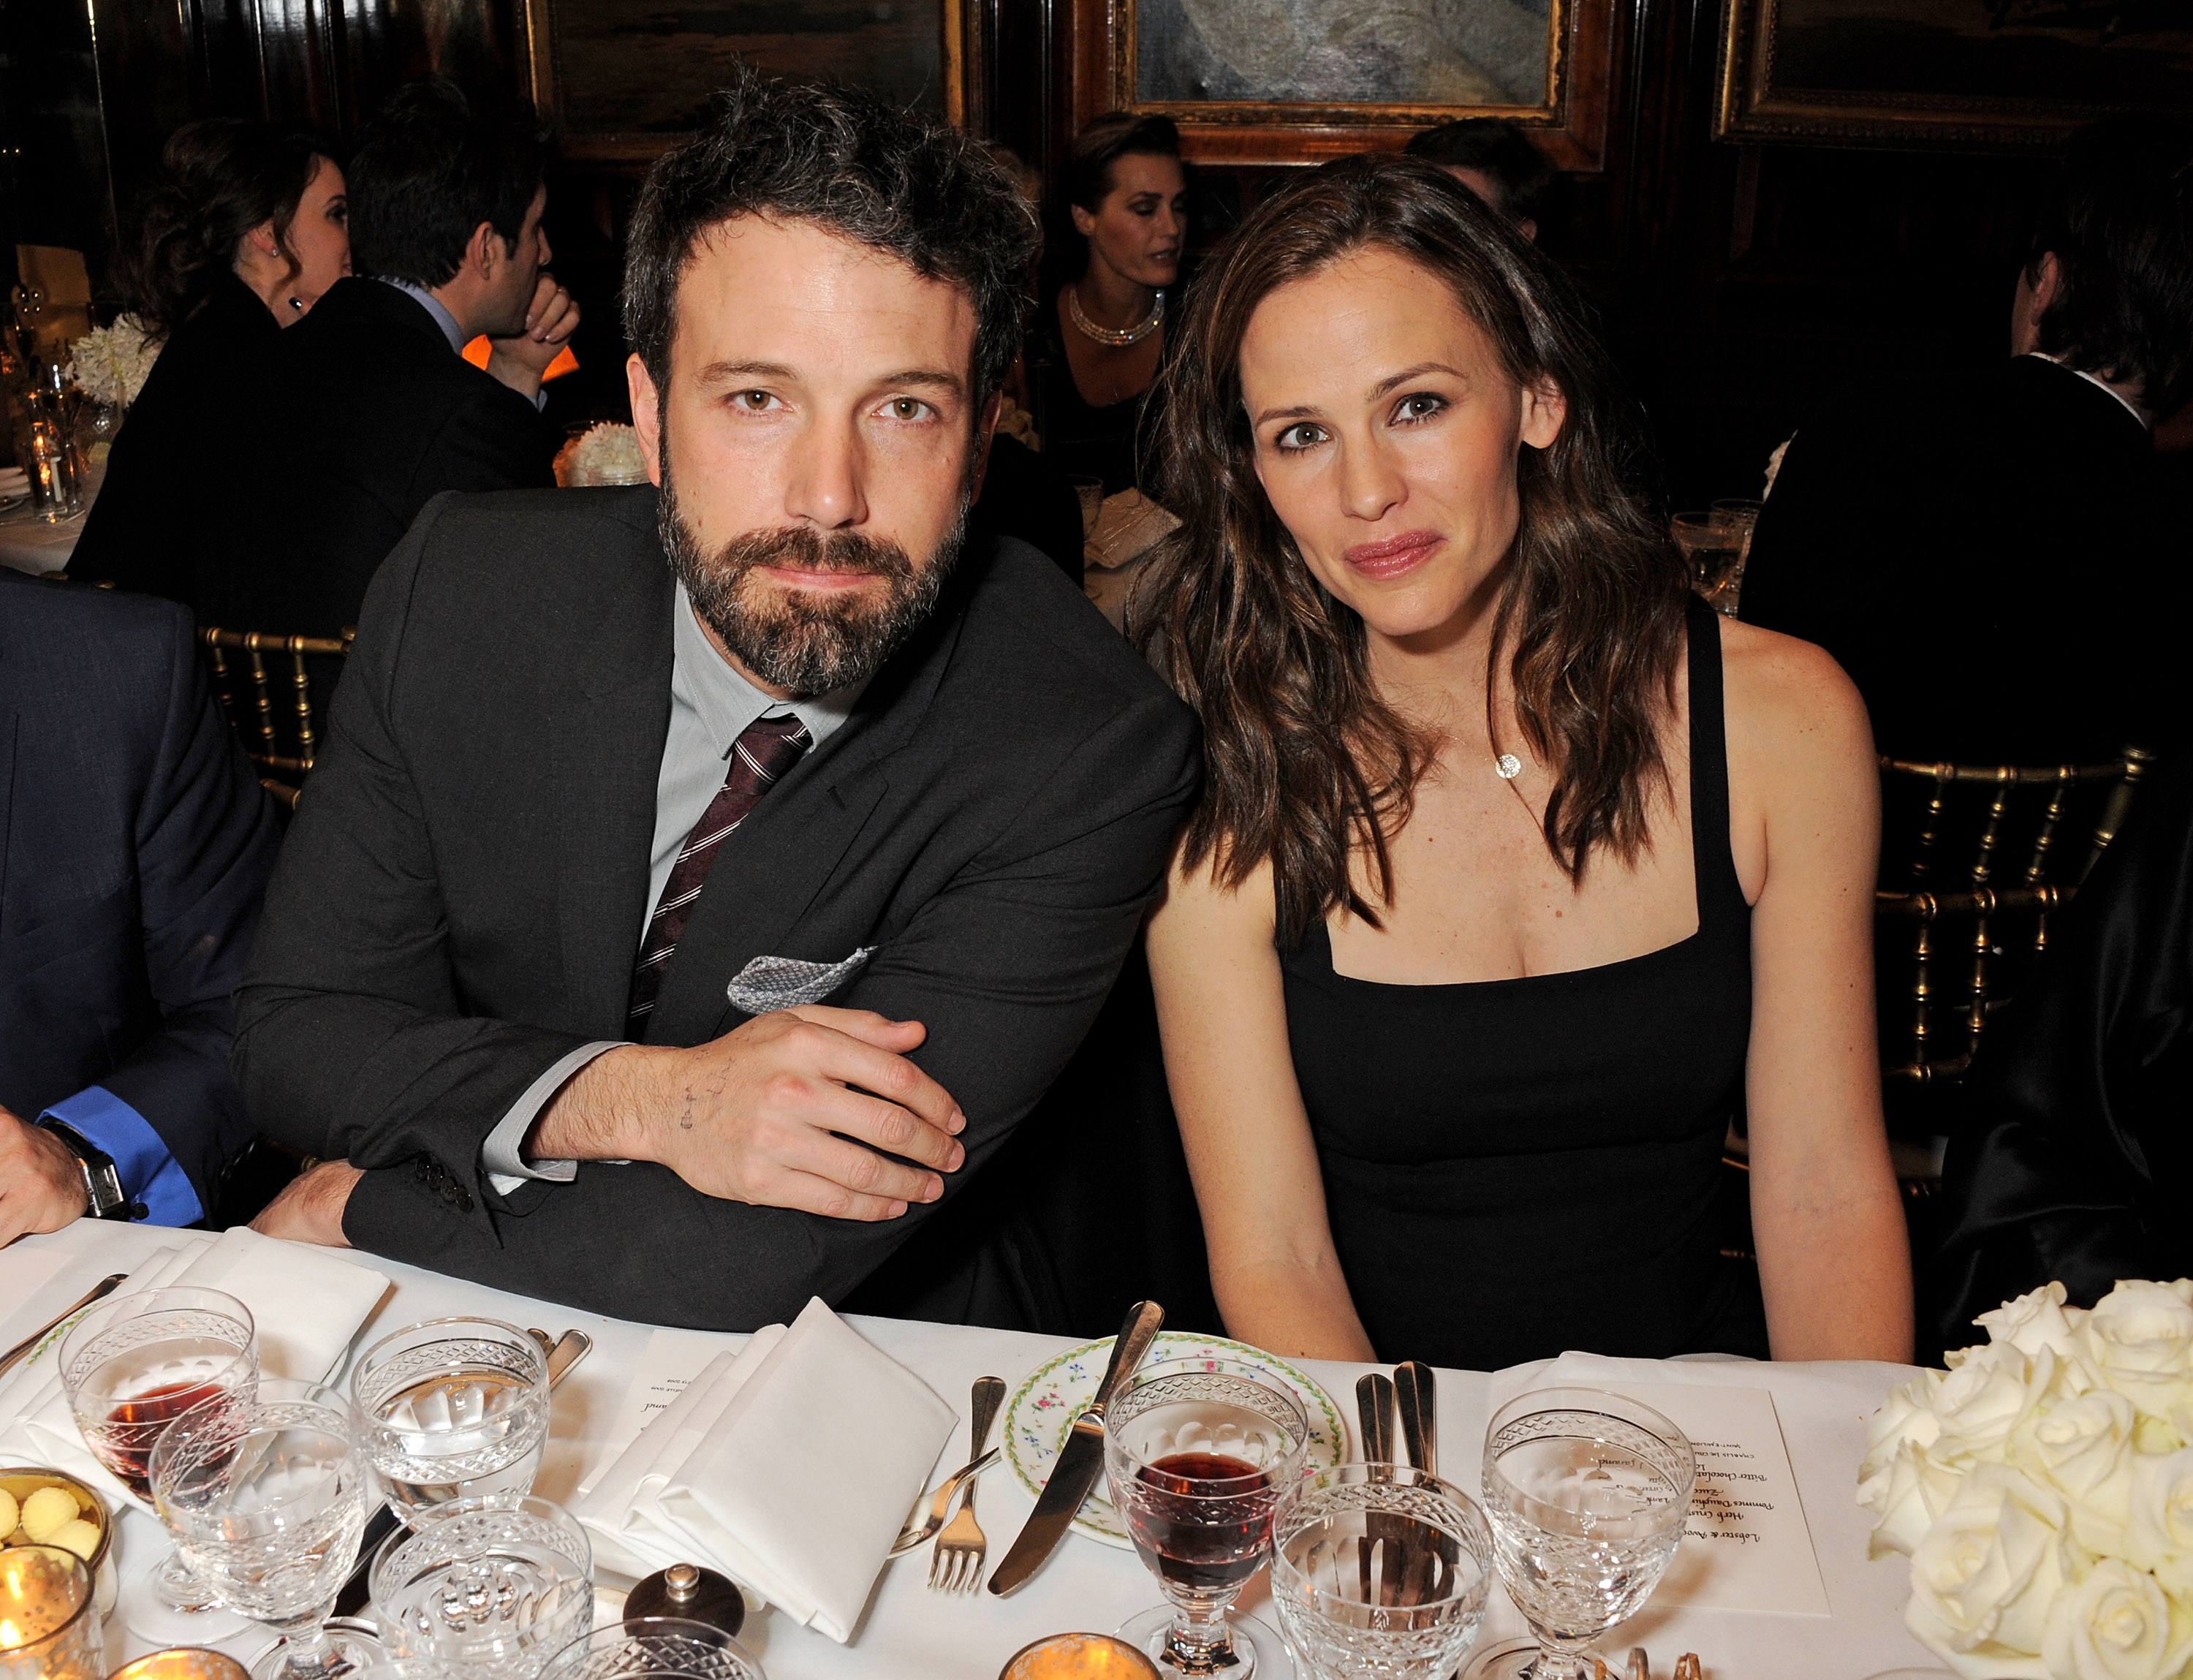 Ben Affleck and Jennifer Garner attend a cocktail party and dinner in London, England on February 8, 2013 | Source: Getty Images